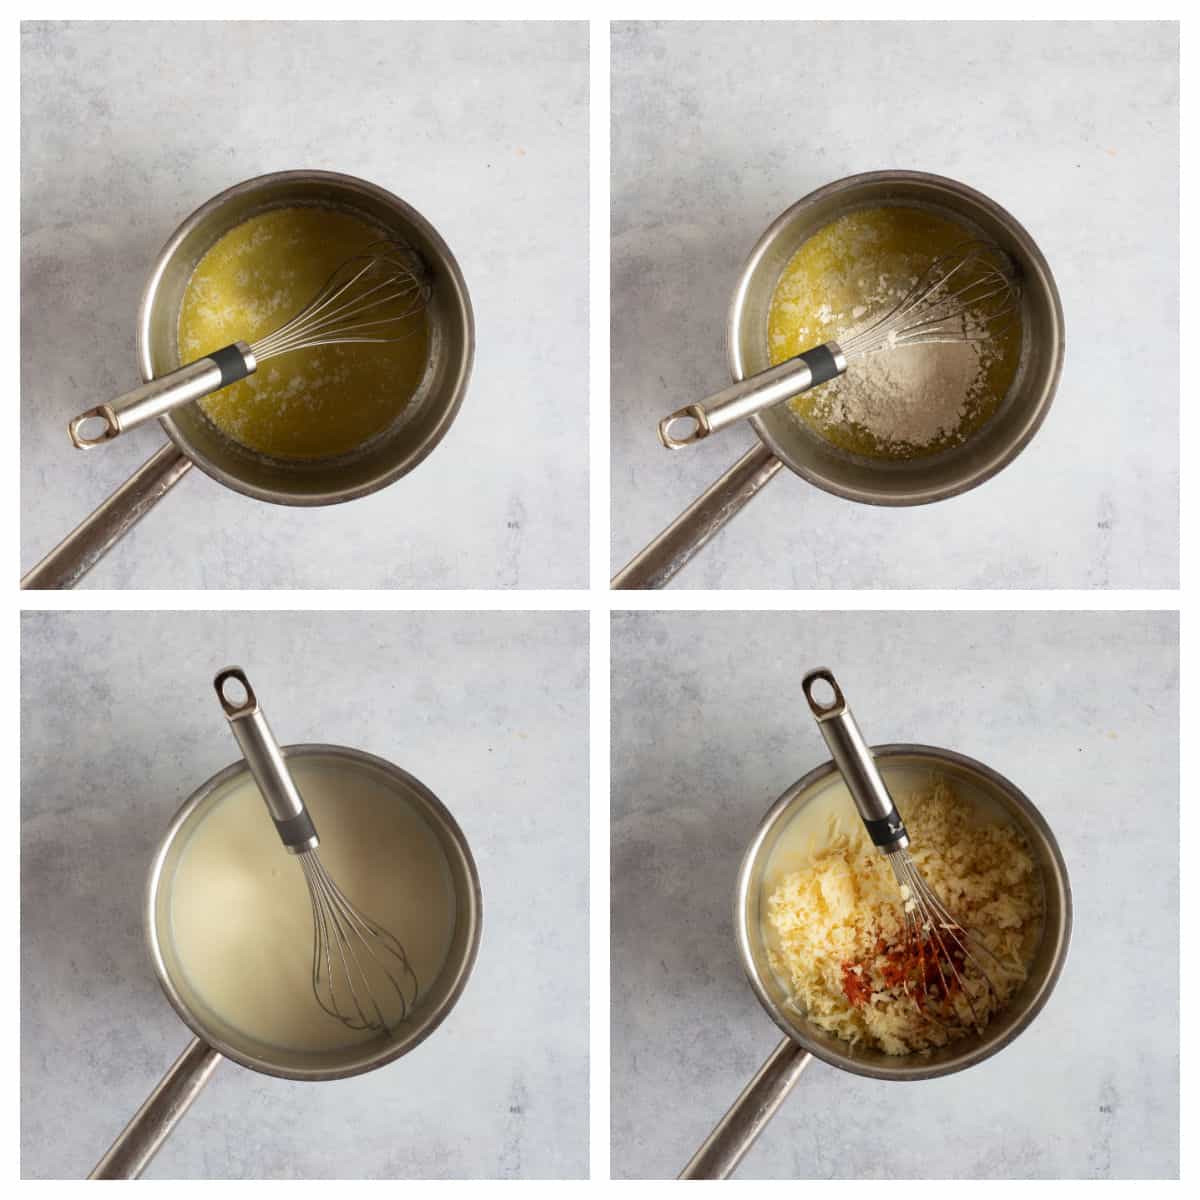 Step by step photo instructions for making cheese sauce.